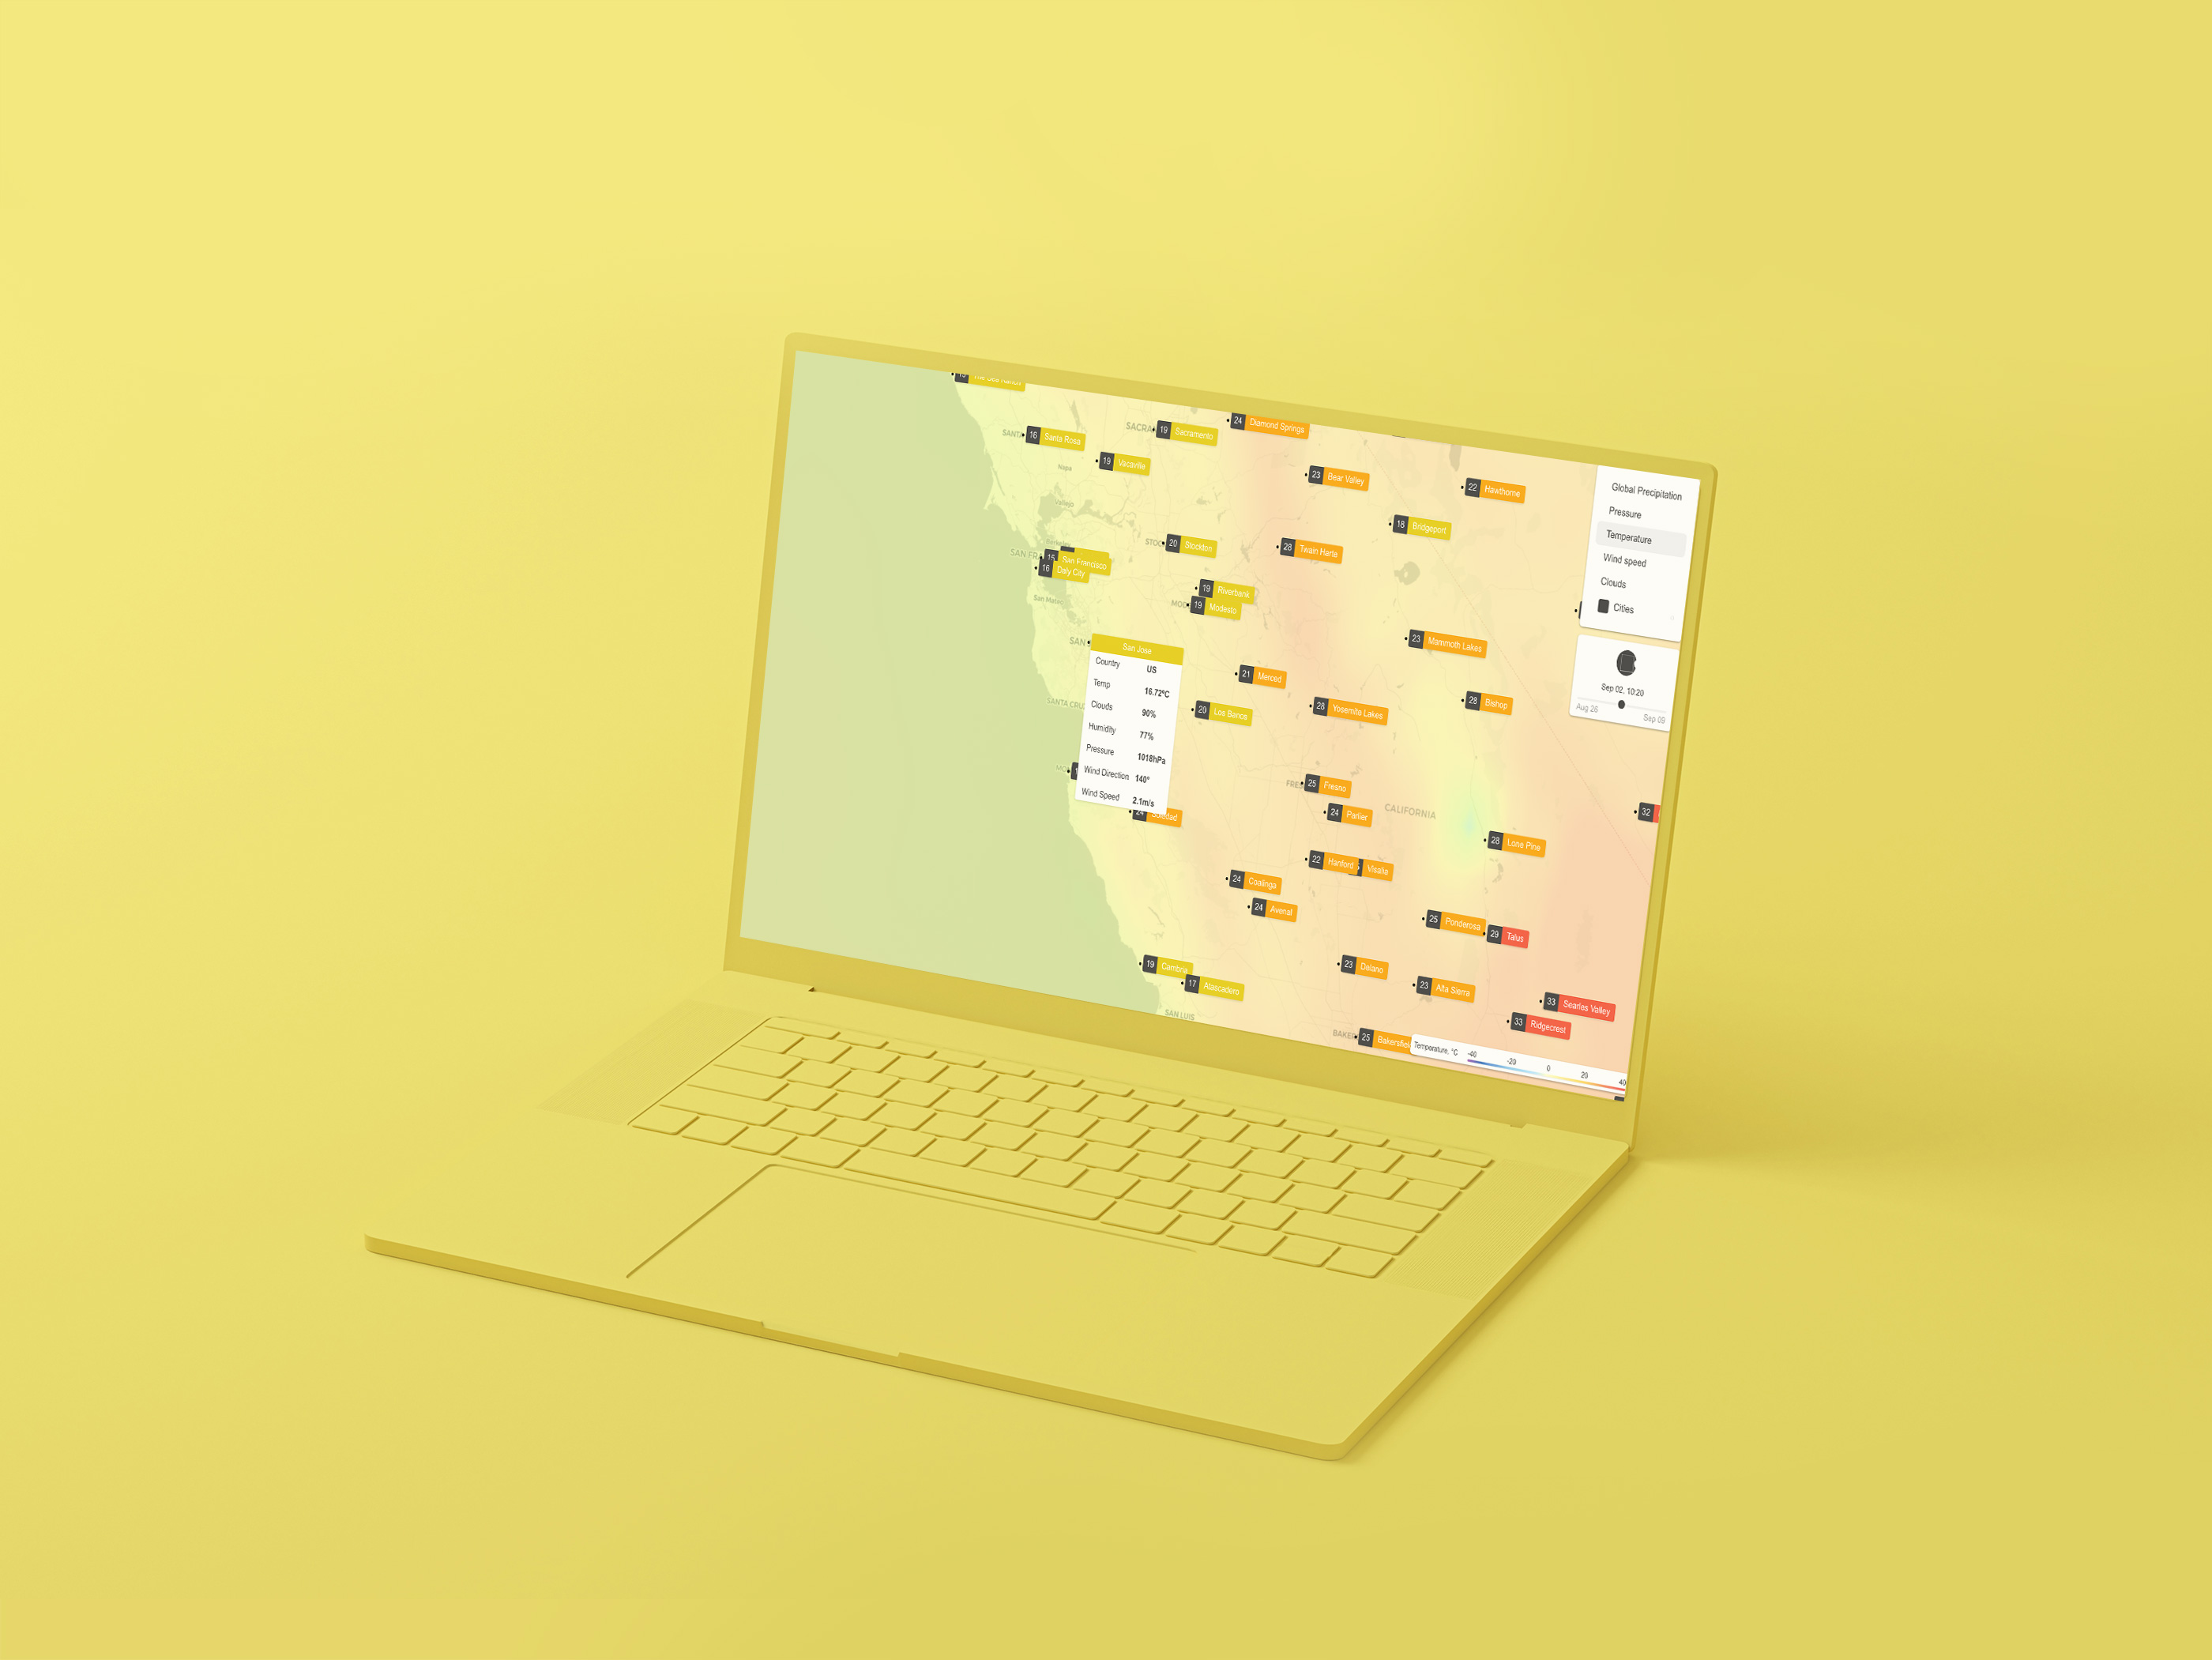 Open laptop displaying weather map of western United States